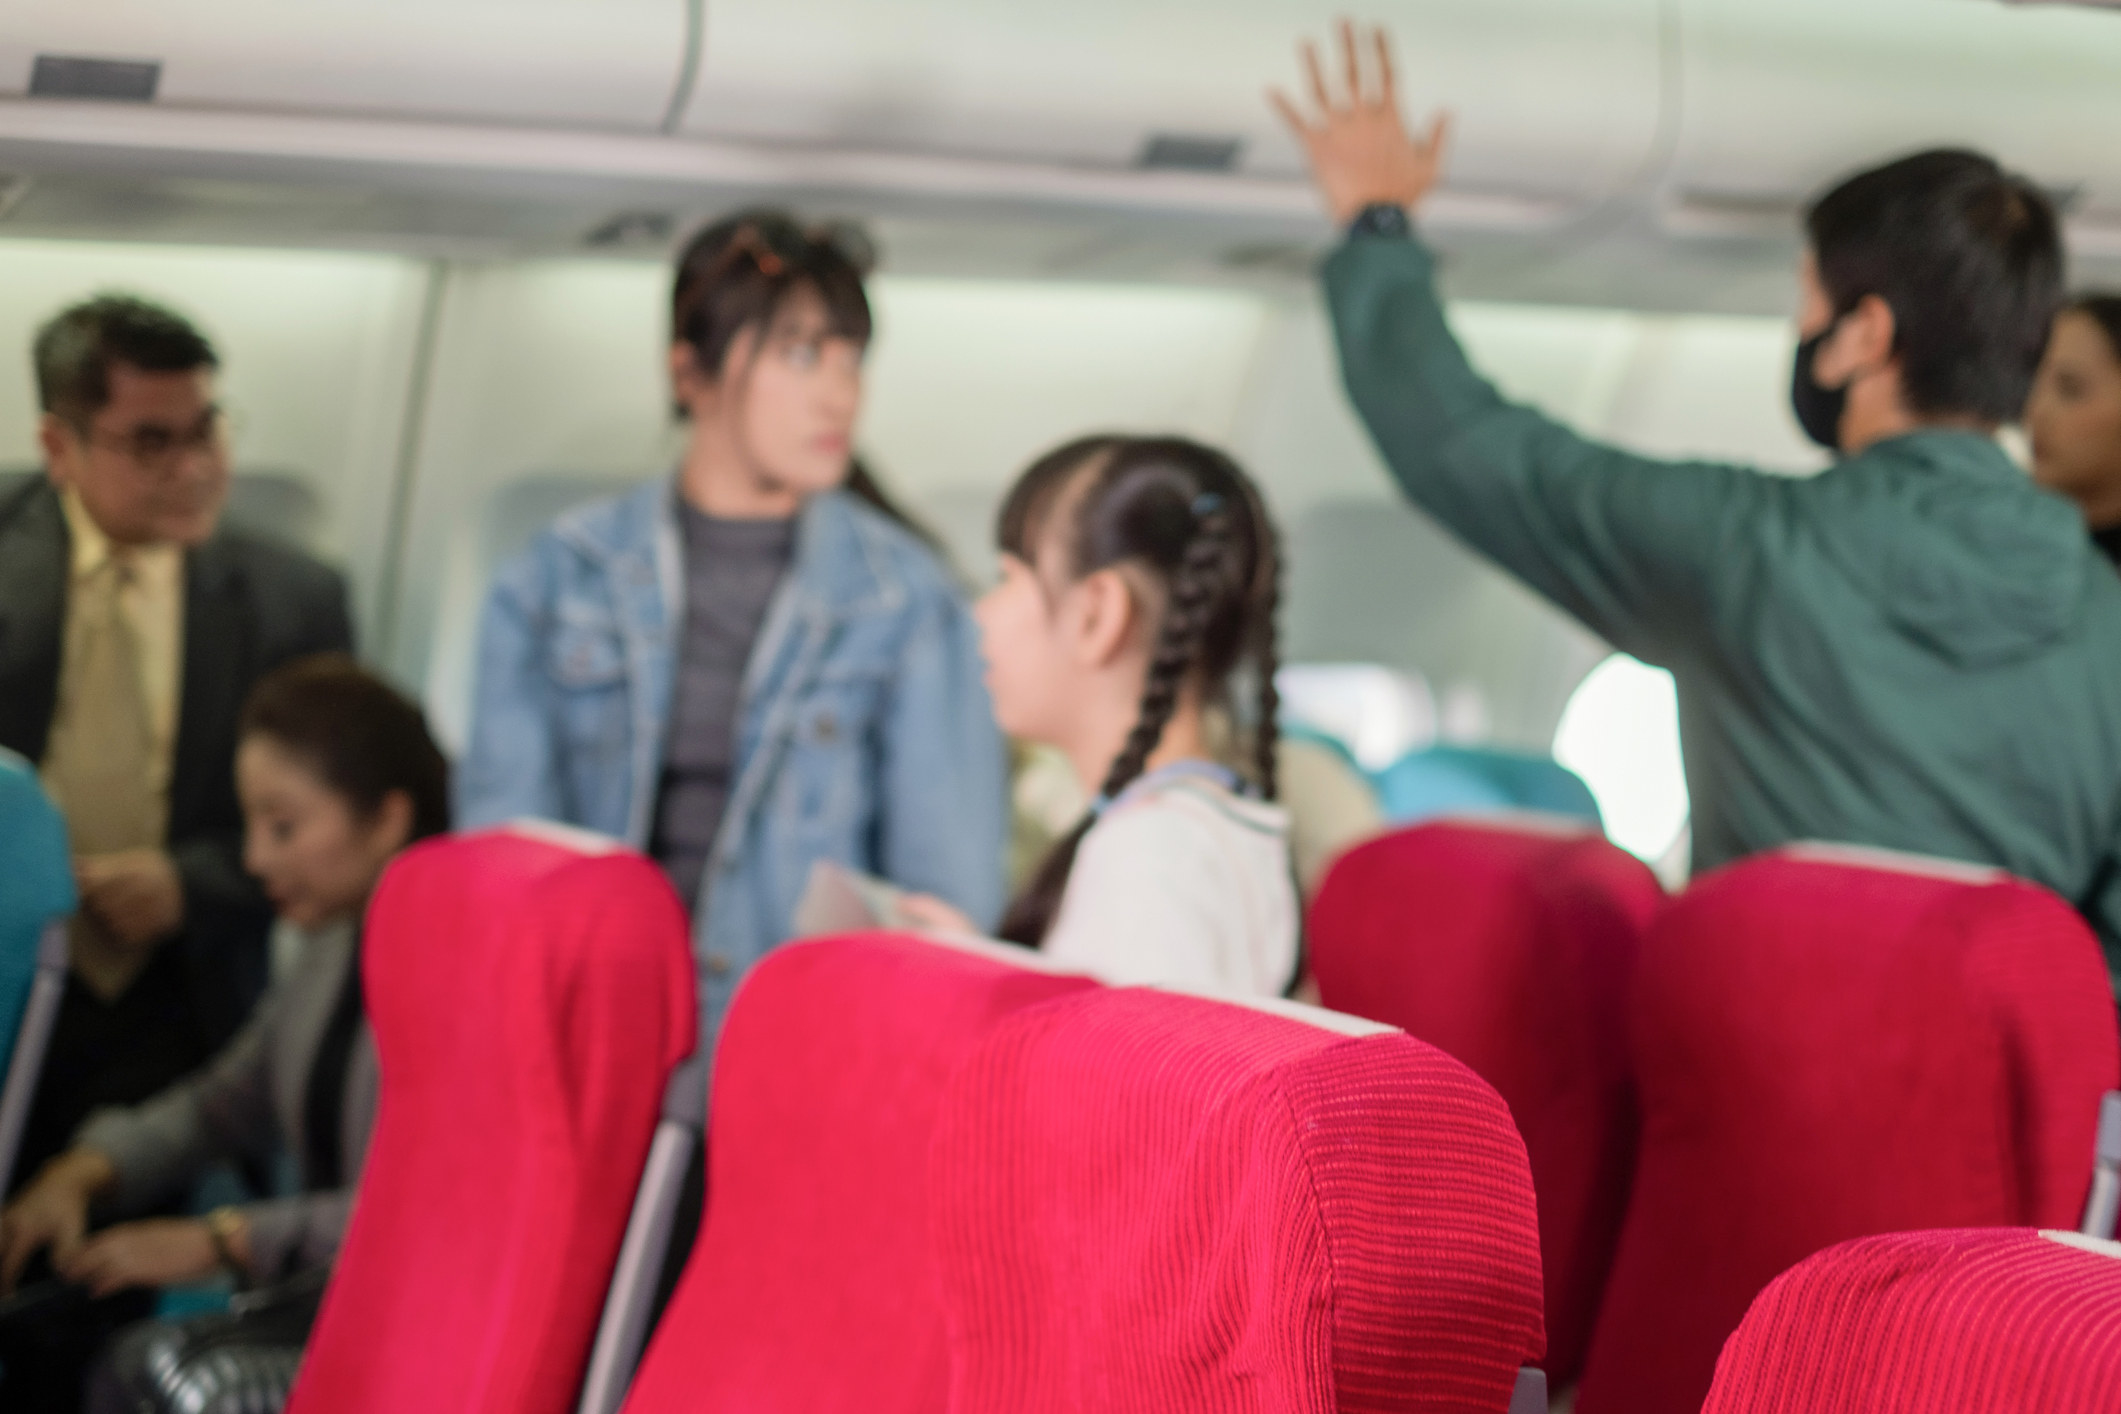 People stand up on an airplane and reach for the overhead compartment